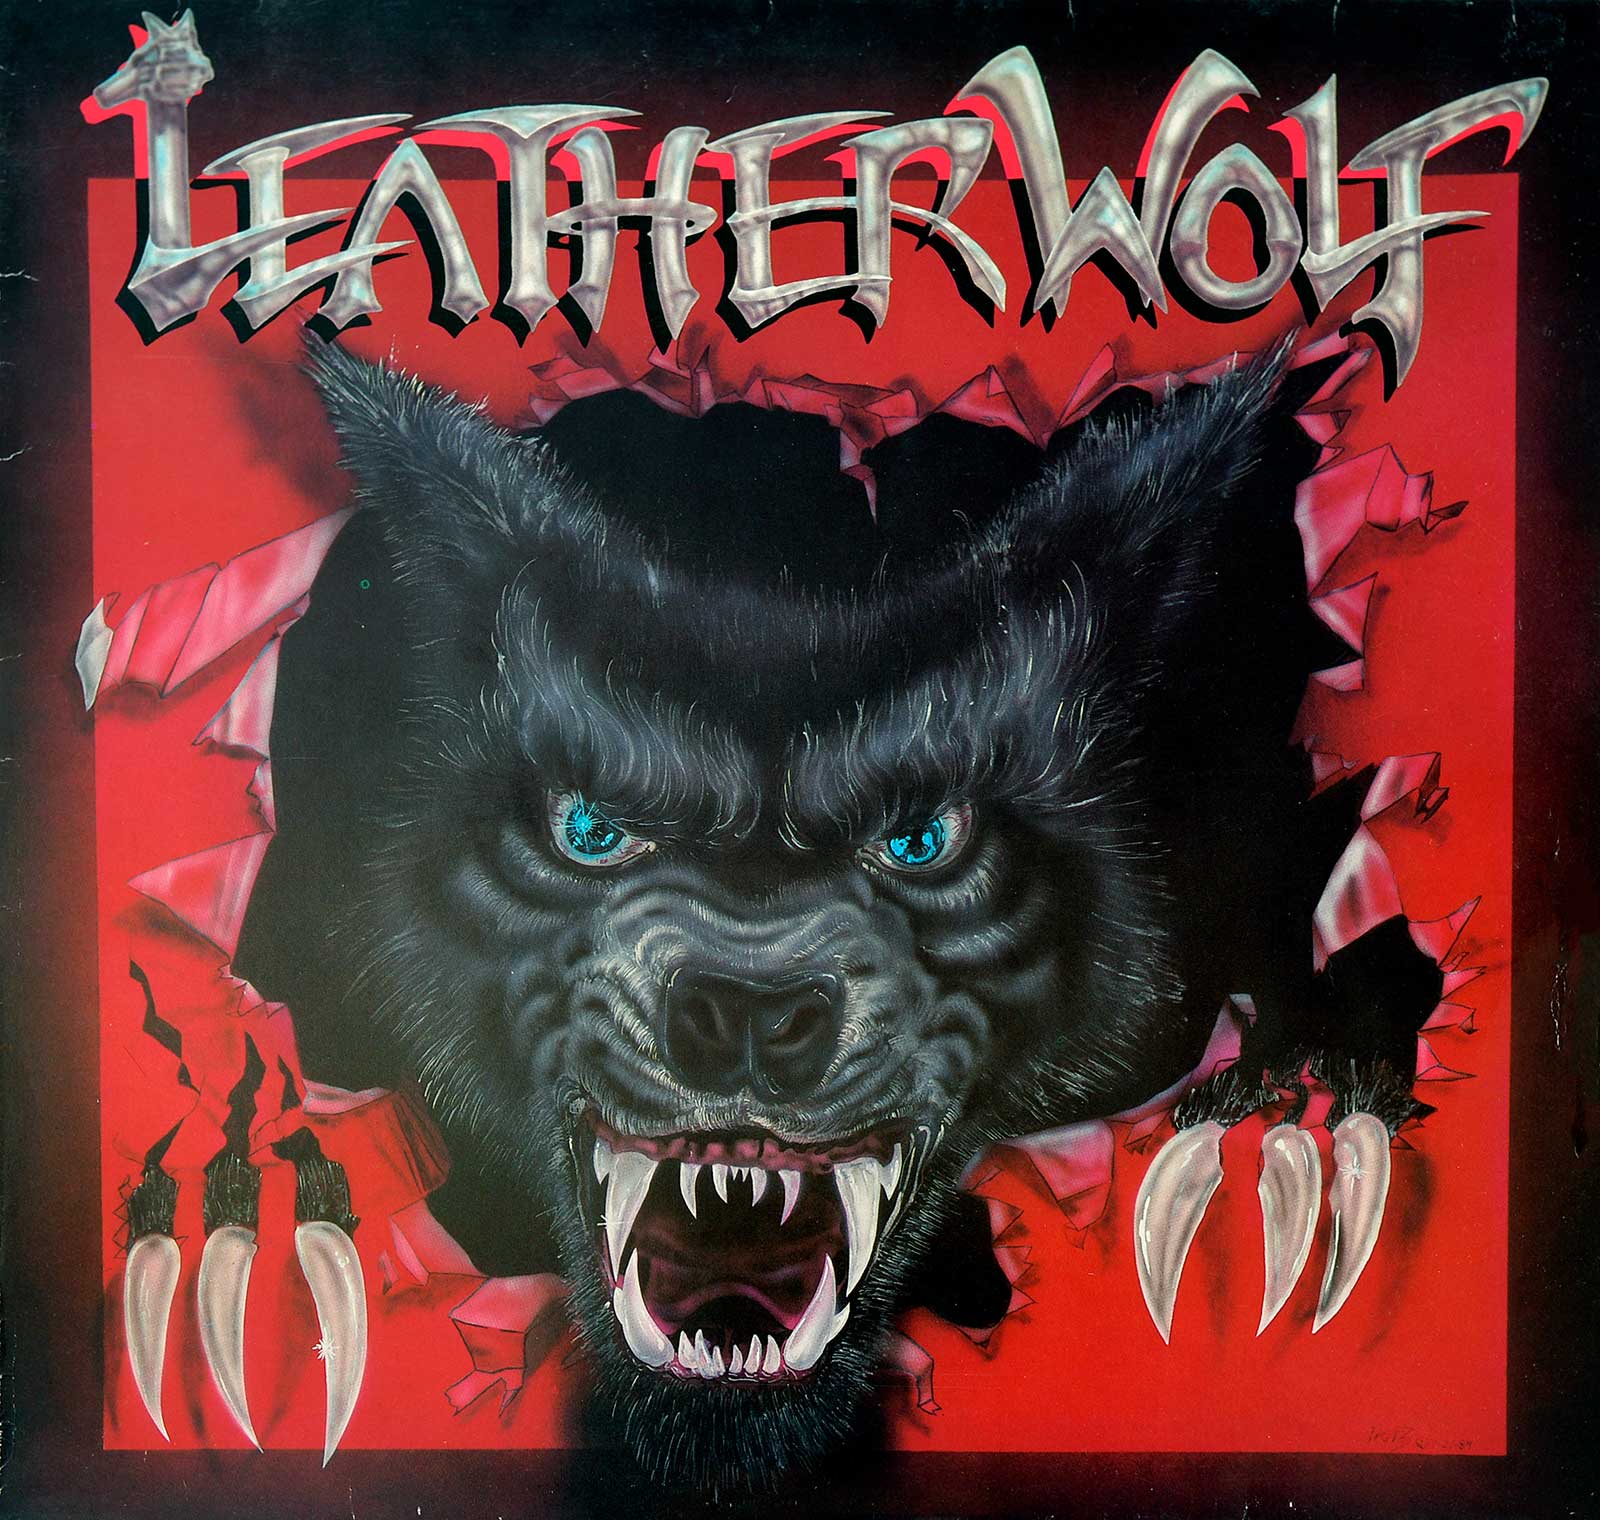 large album front cover photo of: Leatherwolf Endangered Species 1984 